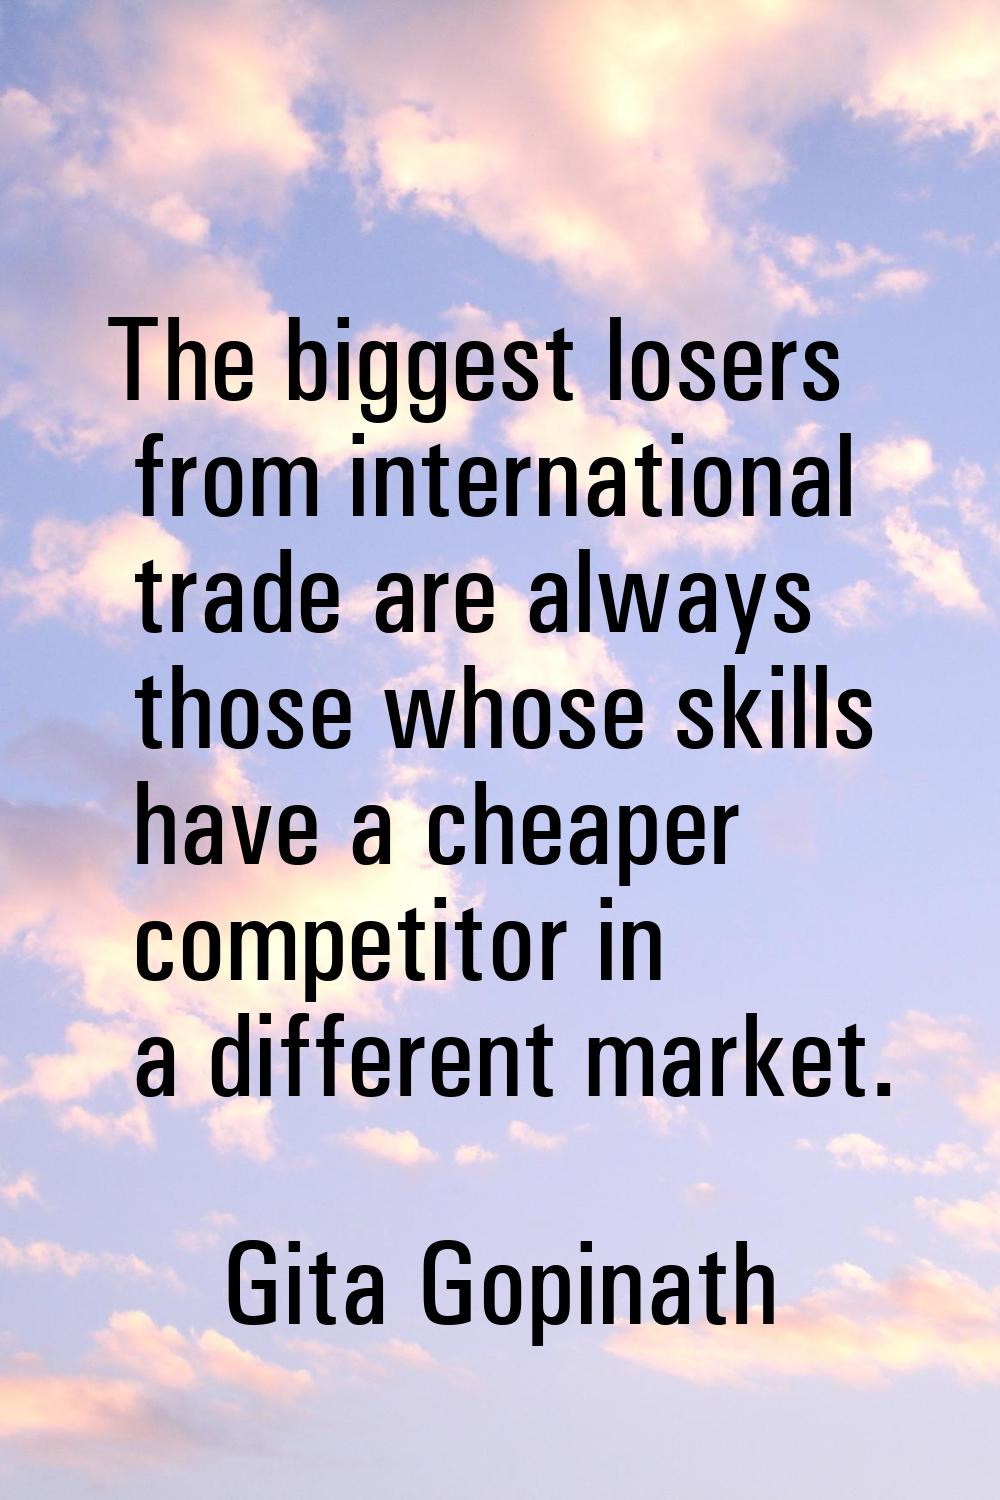 The biggest losers from international trade are always those whose skills have a cheaper competitor